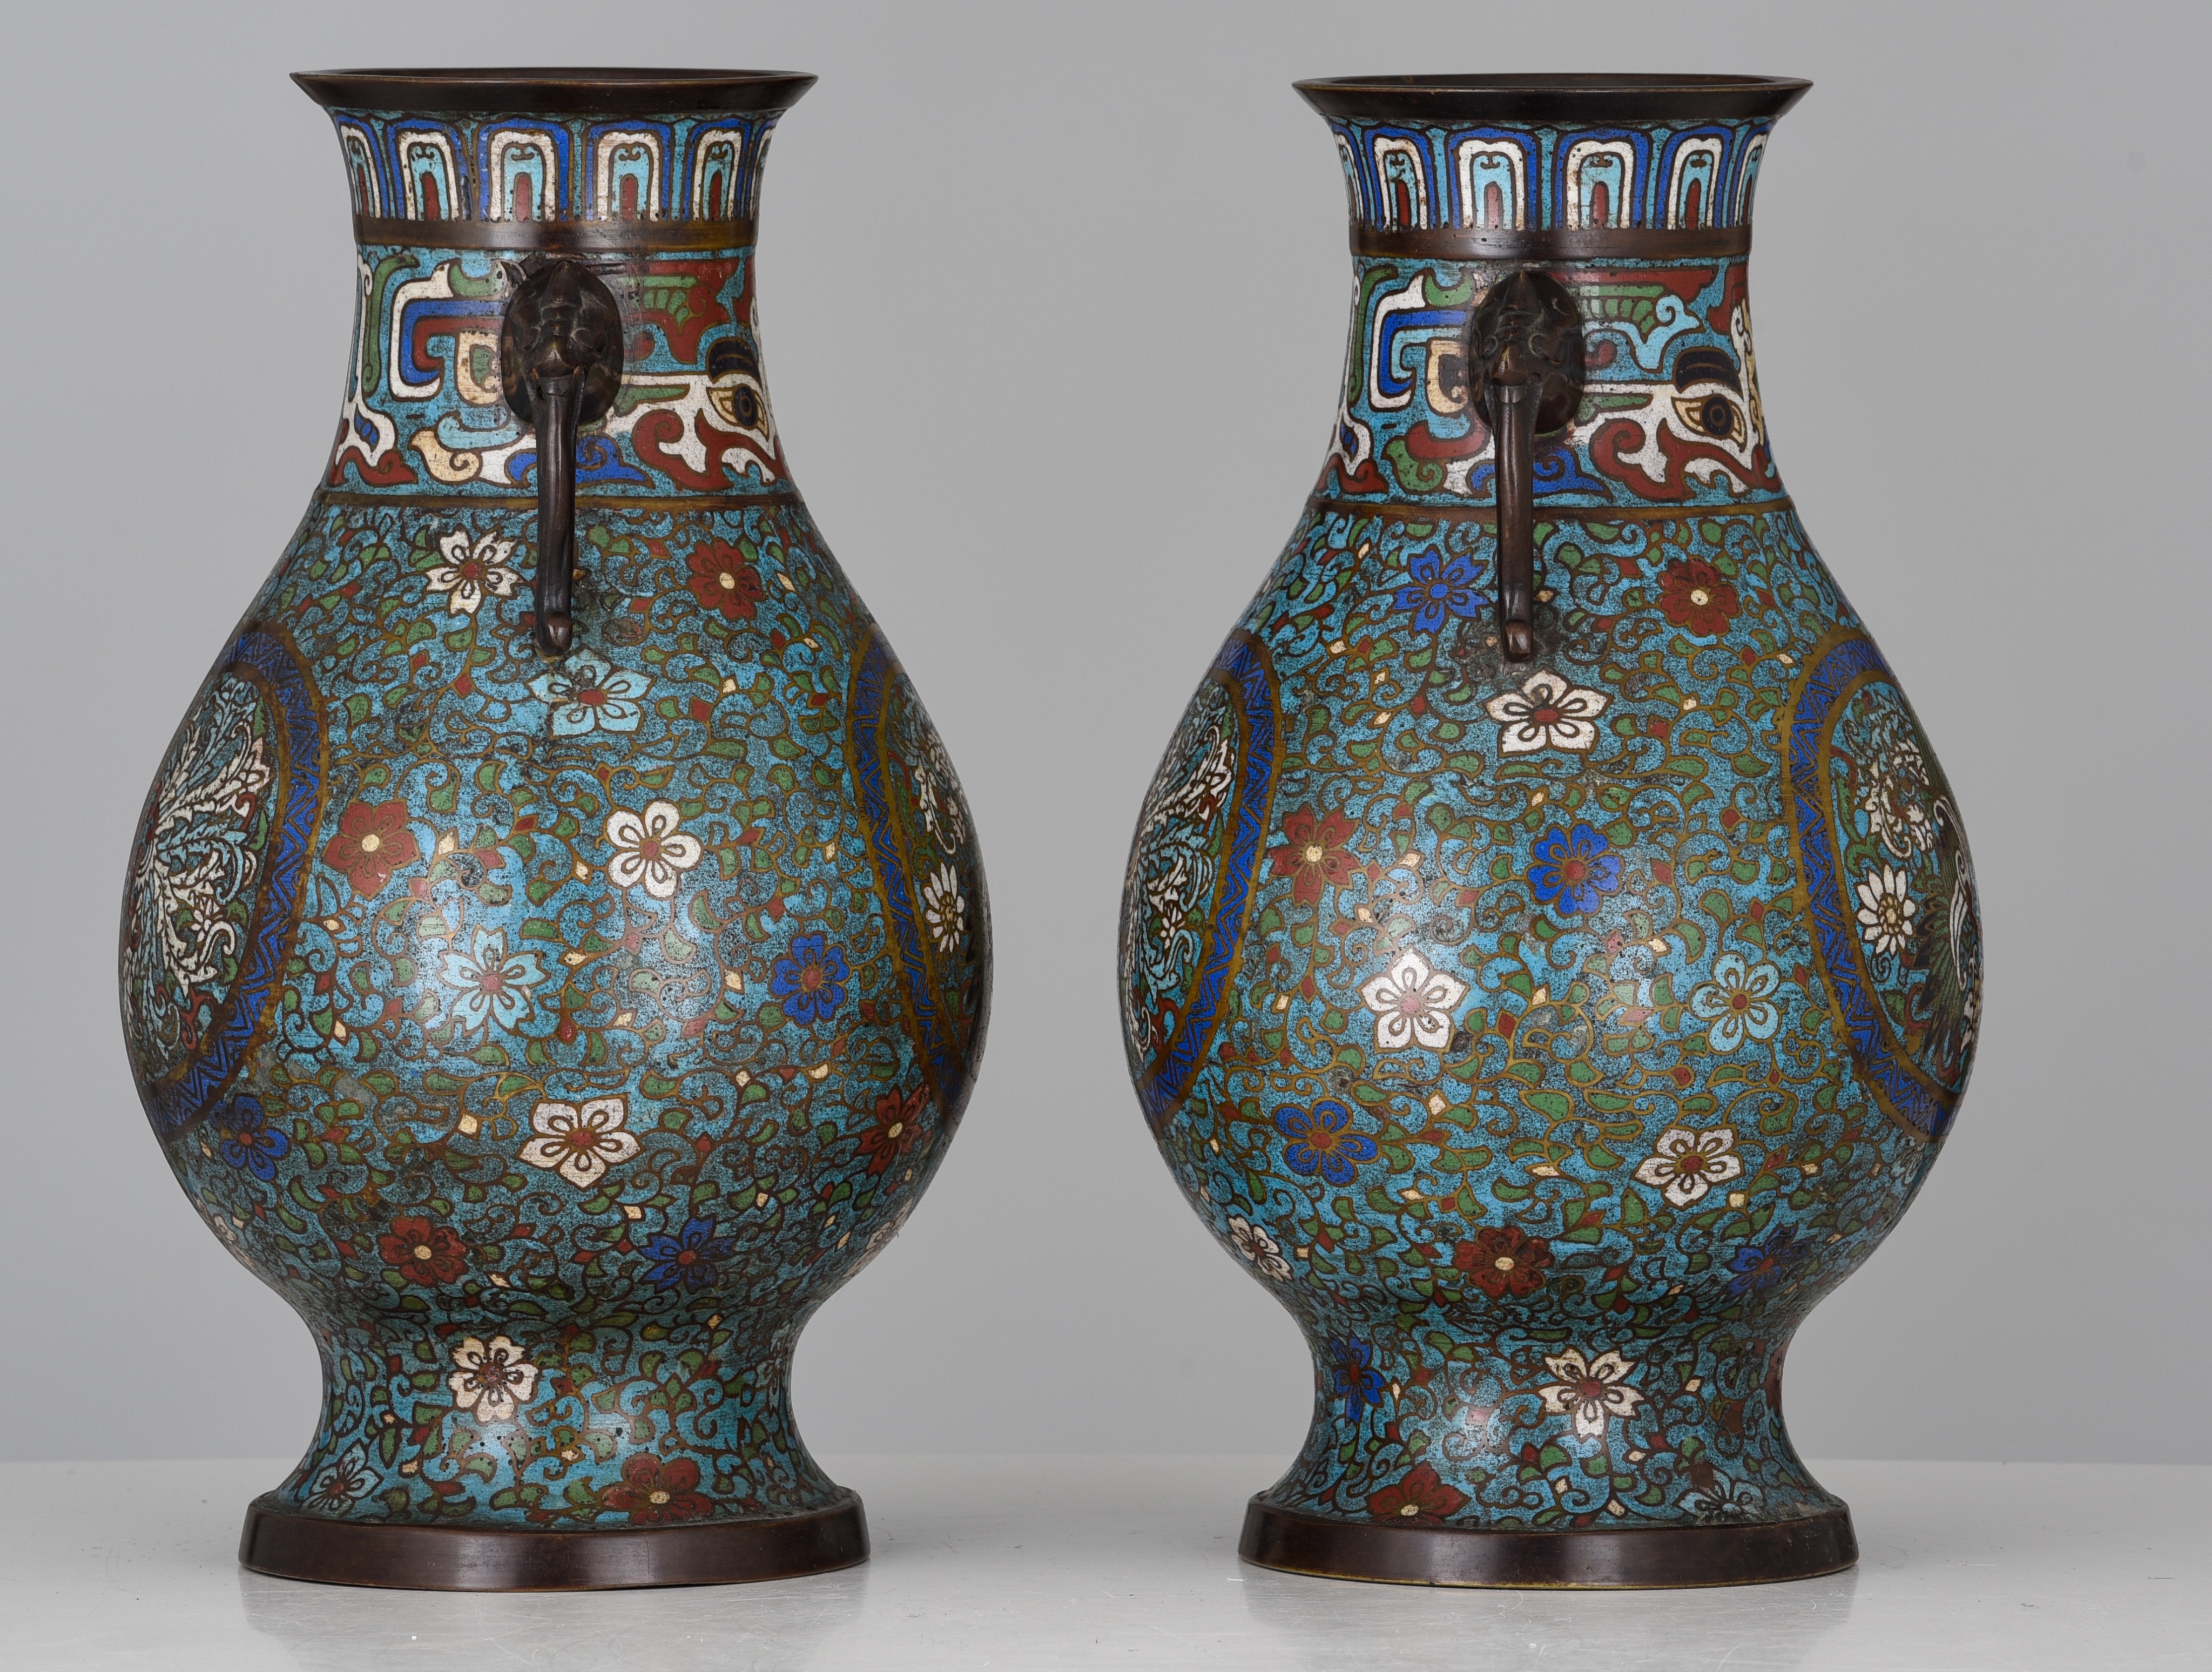 A pair of Japanese champleve bronze vases, 19thC/20thC, H 36 cm - Image 5 of 7